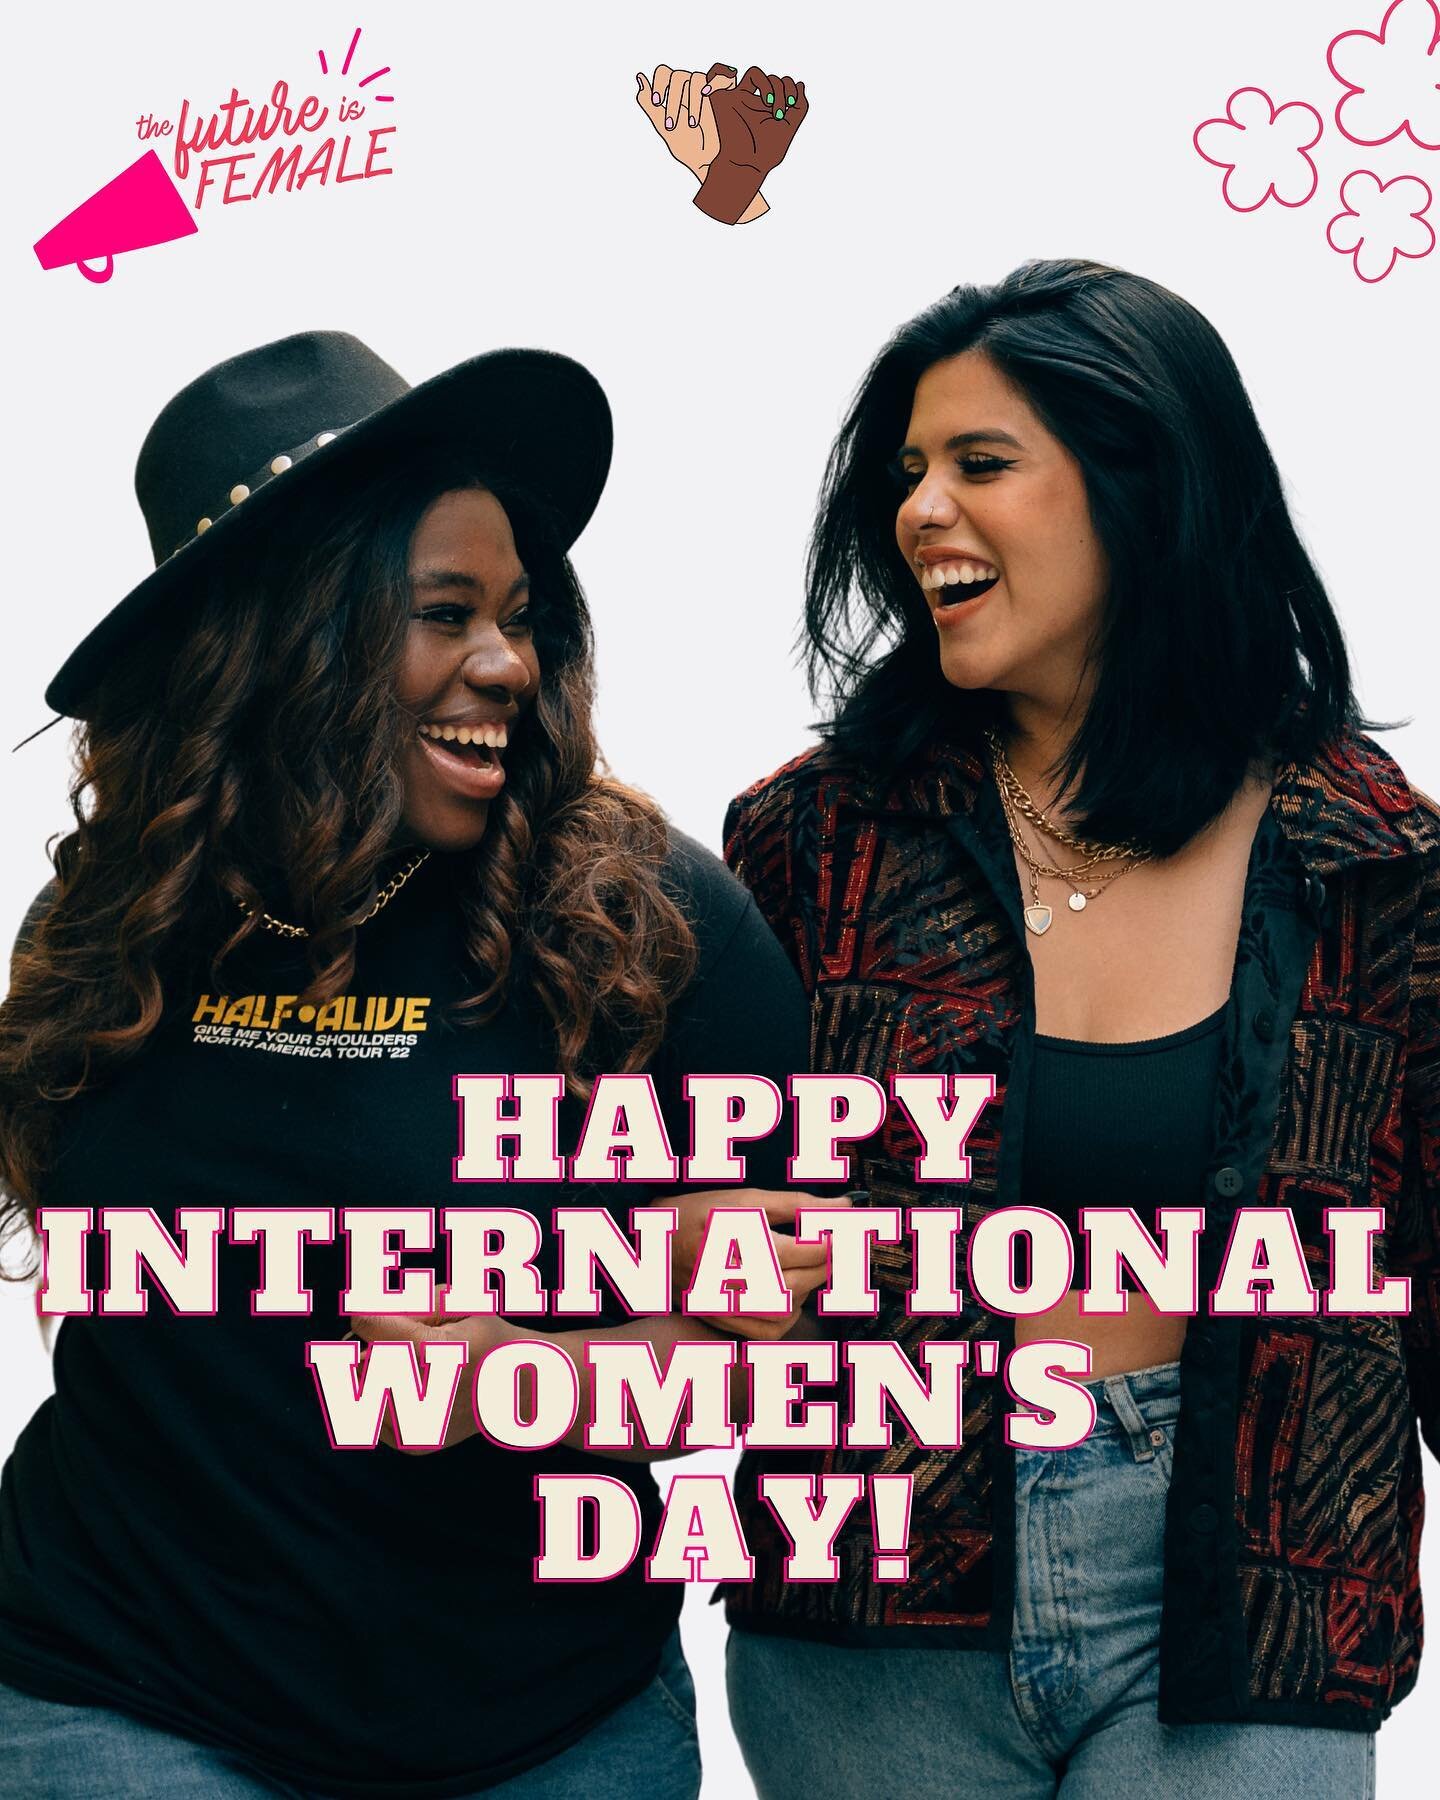 Happy International Women&rsquo;s Day!! 🥳🥳🥰😘

We celebrate all the women out there who have paved the way for us, who stood up and said NO to being silent, and acknowledged the disparity and lack of women in the room. Thank you powerful WOMEN for